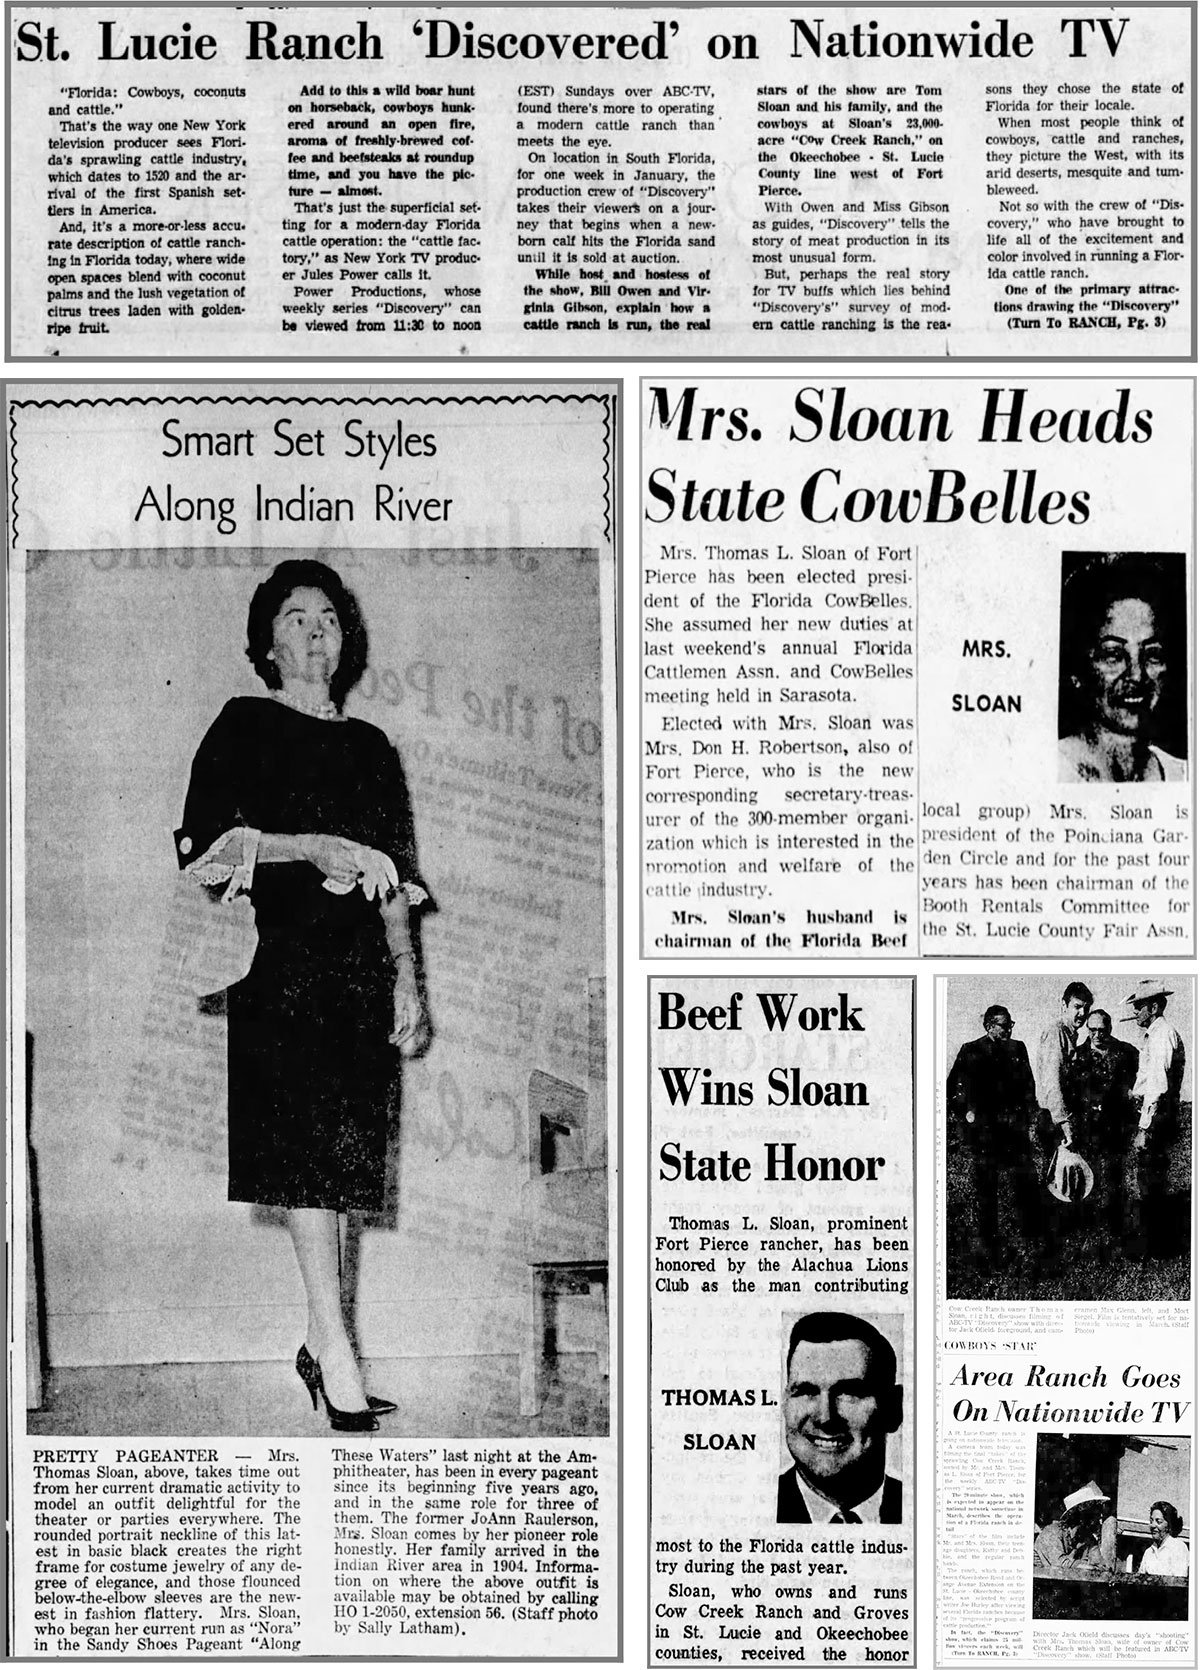 Headlines from local newspapers show Tommy and Jo Ann Sloan's accomplishments during the 1960s.